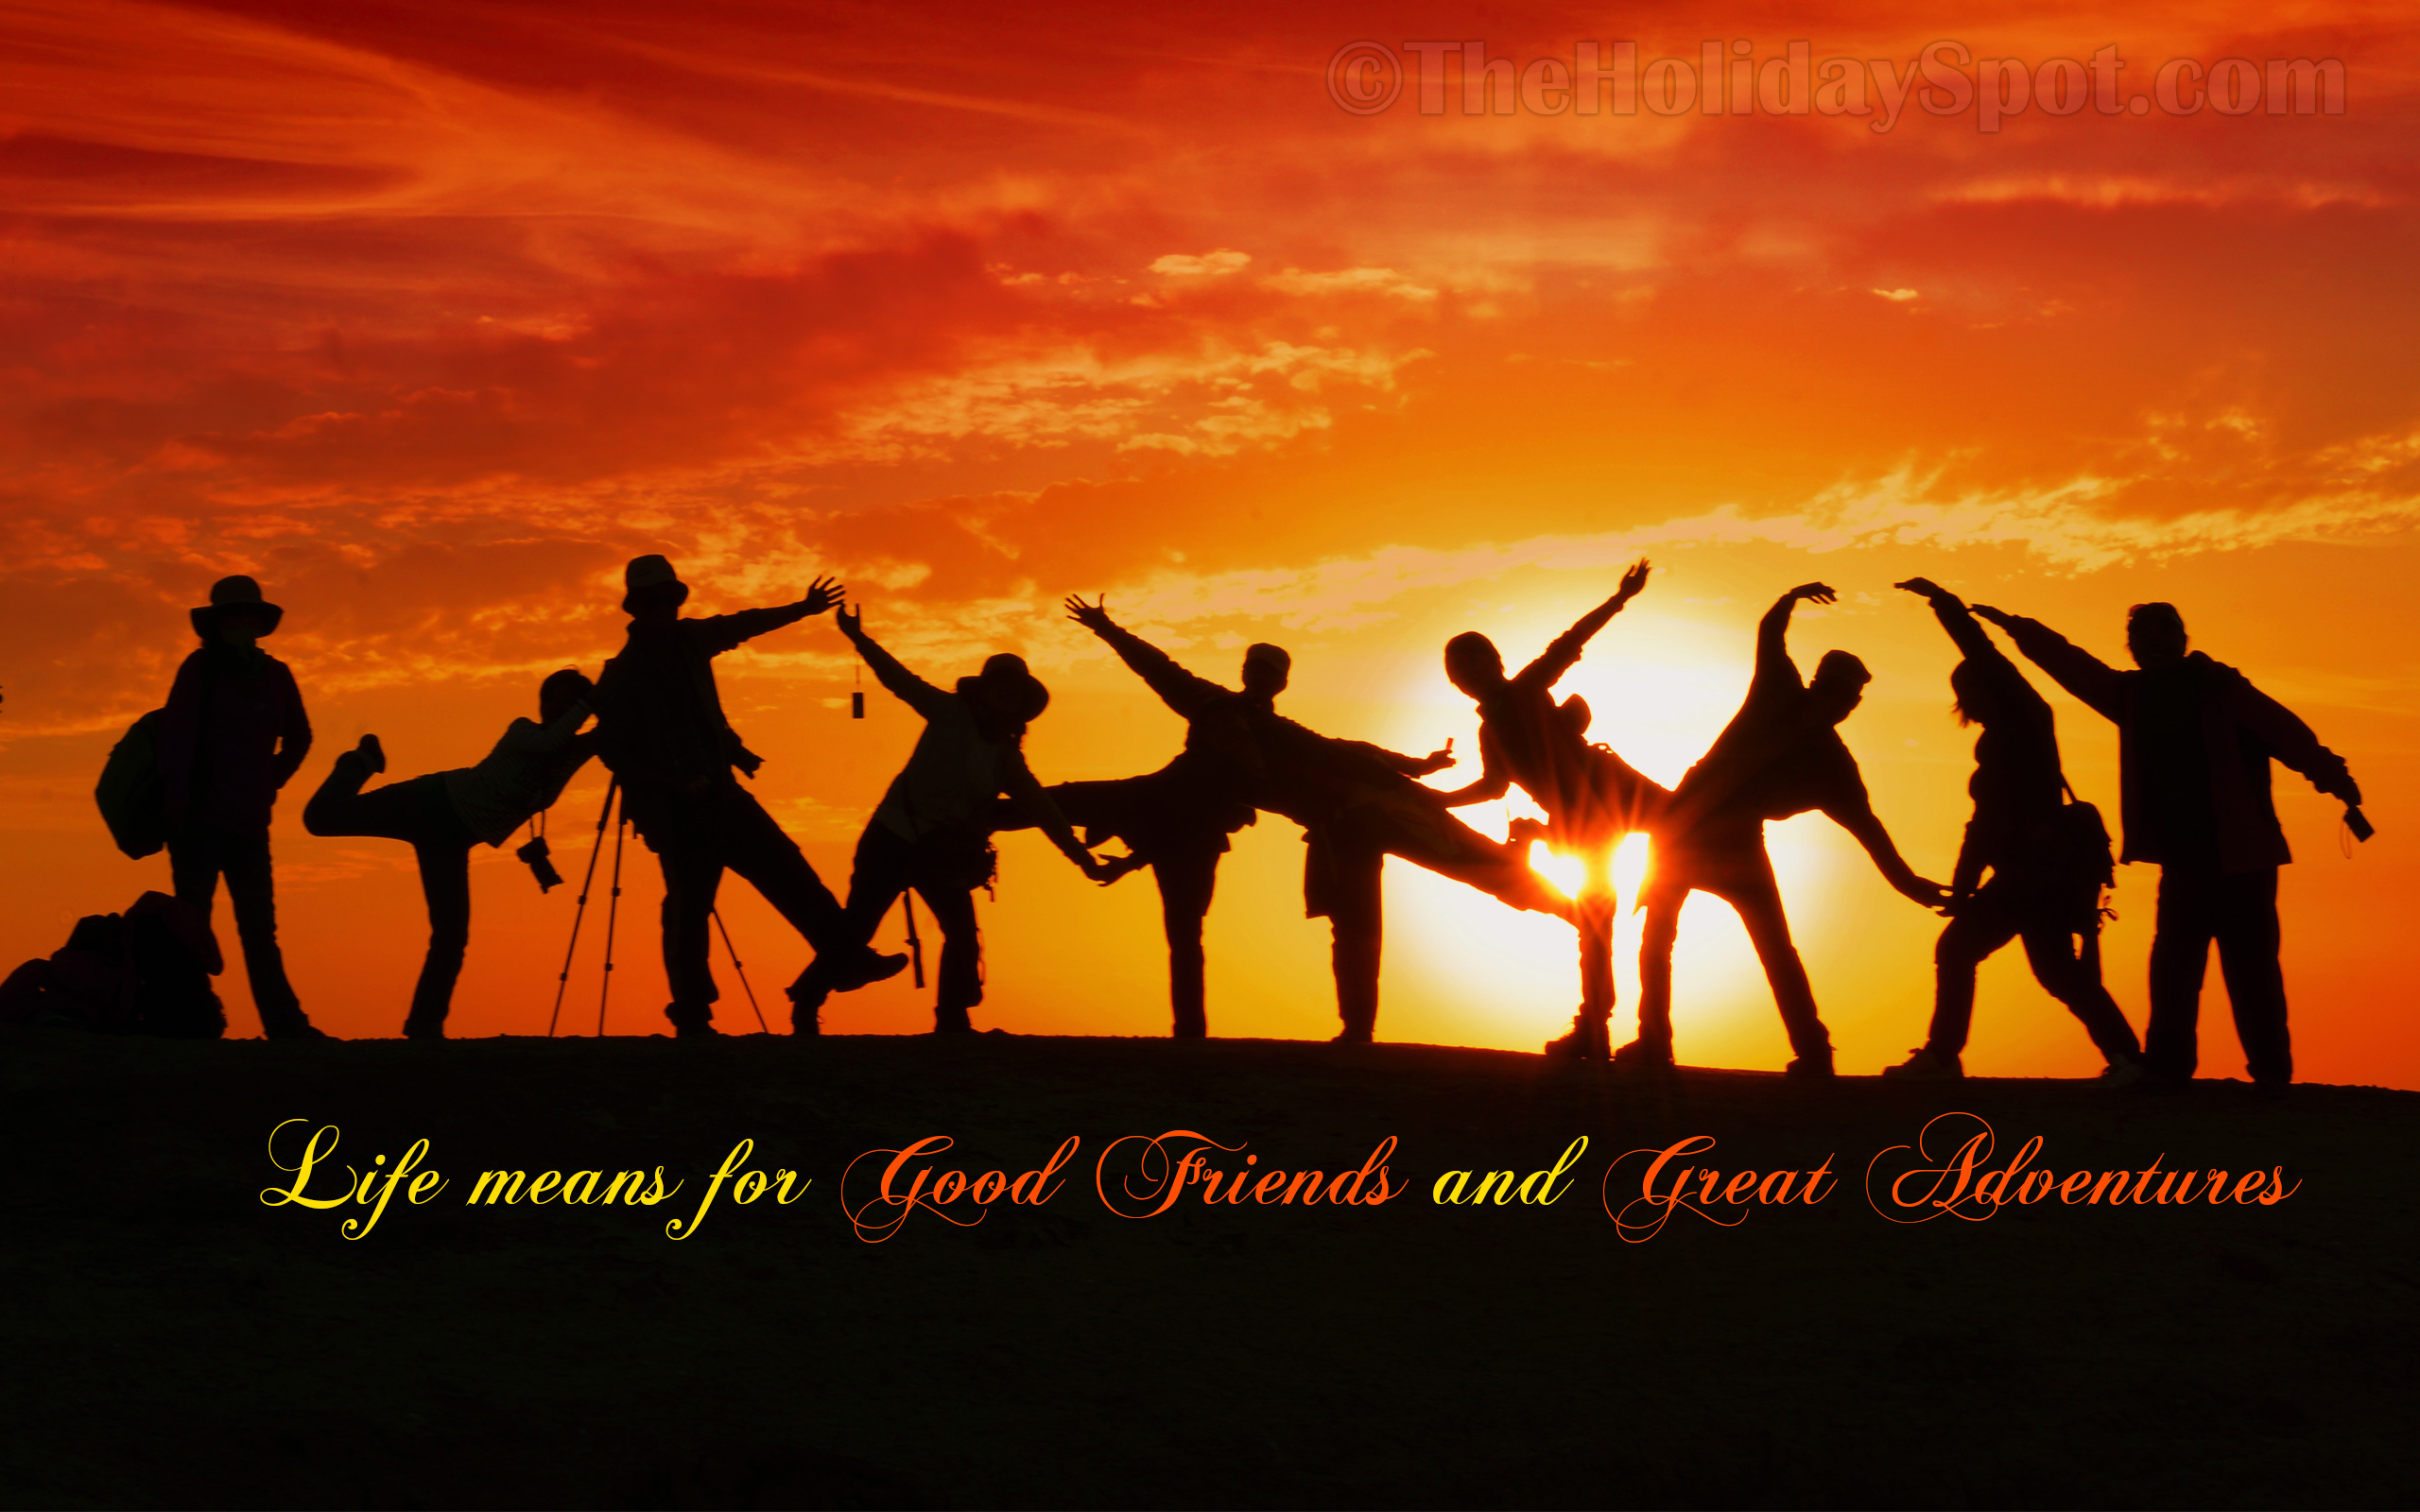 Friendship Day Wallpapers 2022 | Friendship Hd Wallpapers Images